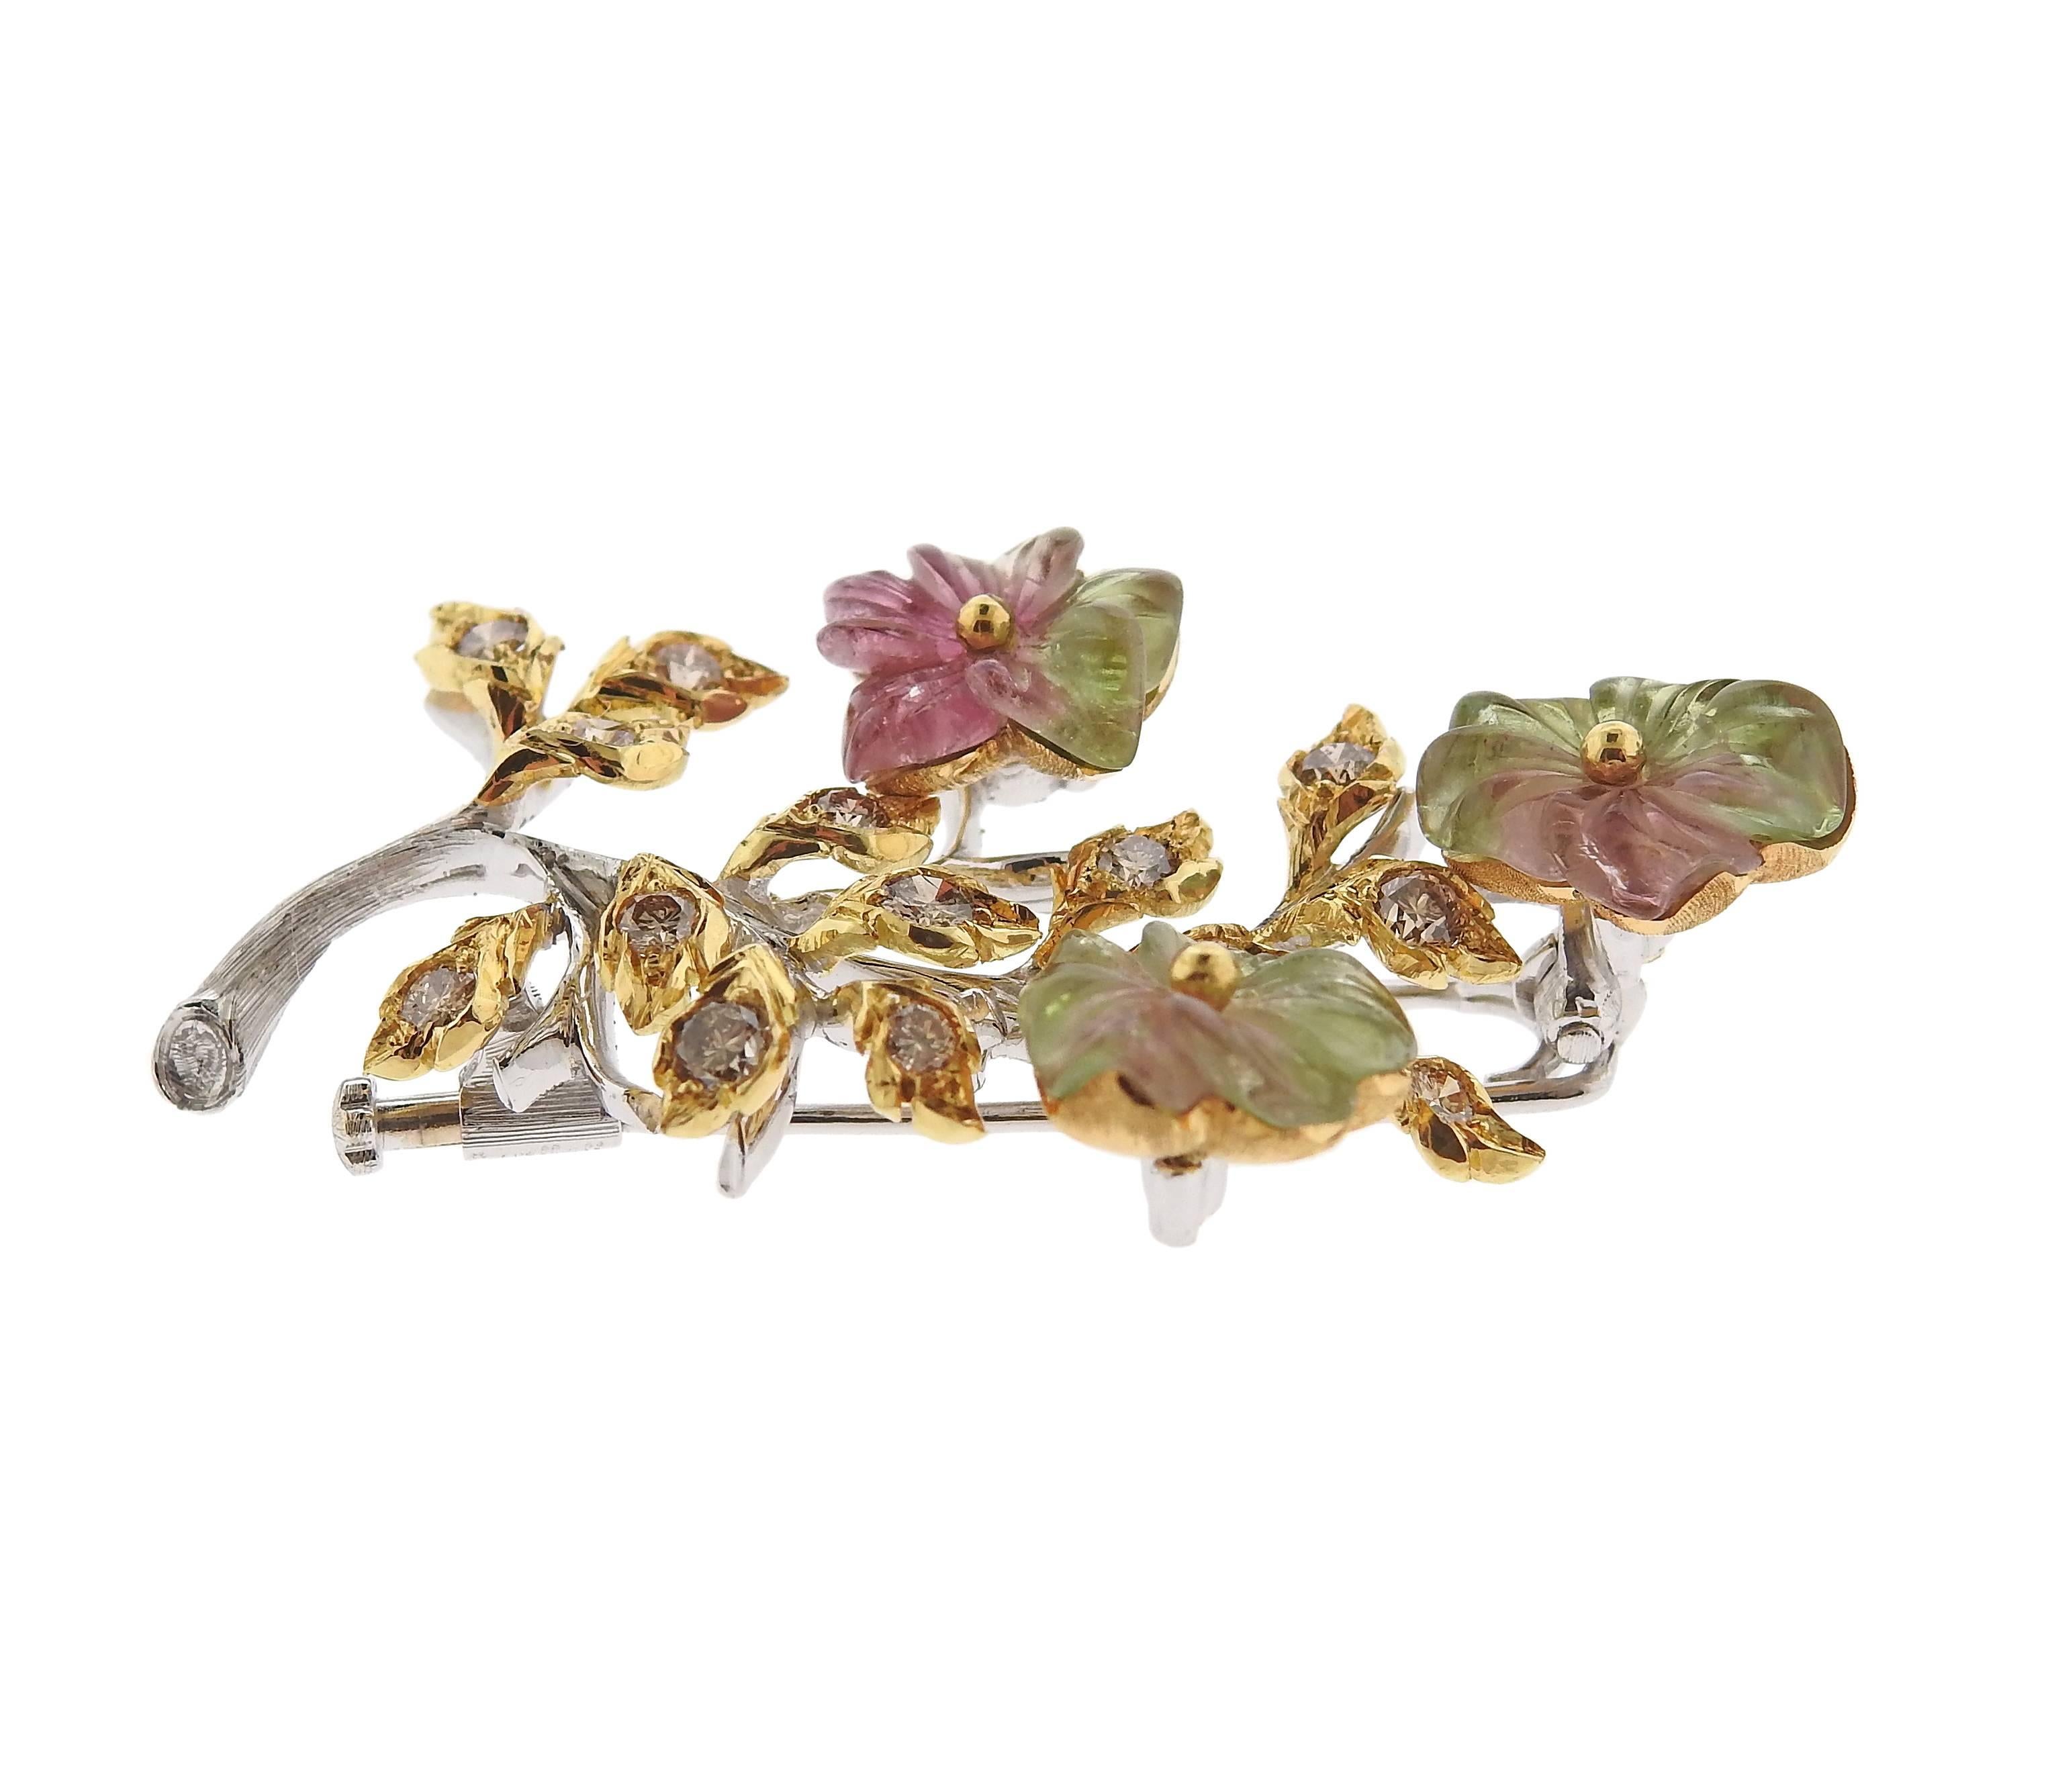 An 18k gold brooch, crafted by Buccellati, decorated with carved tourmaline set in flowers, surrounded with approximately 0.70ctw in diamonds. Brooch measures 48mm x 28mm, weighs 13.5 grams. Marked: Buccellati, 750, P4789, Italy.
Comes with pouch.